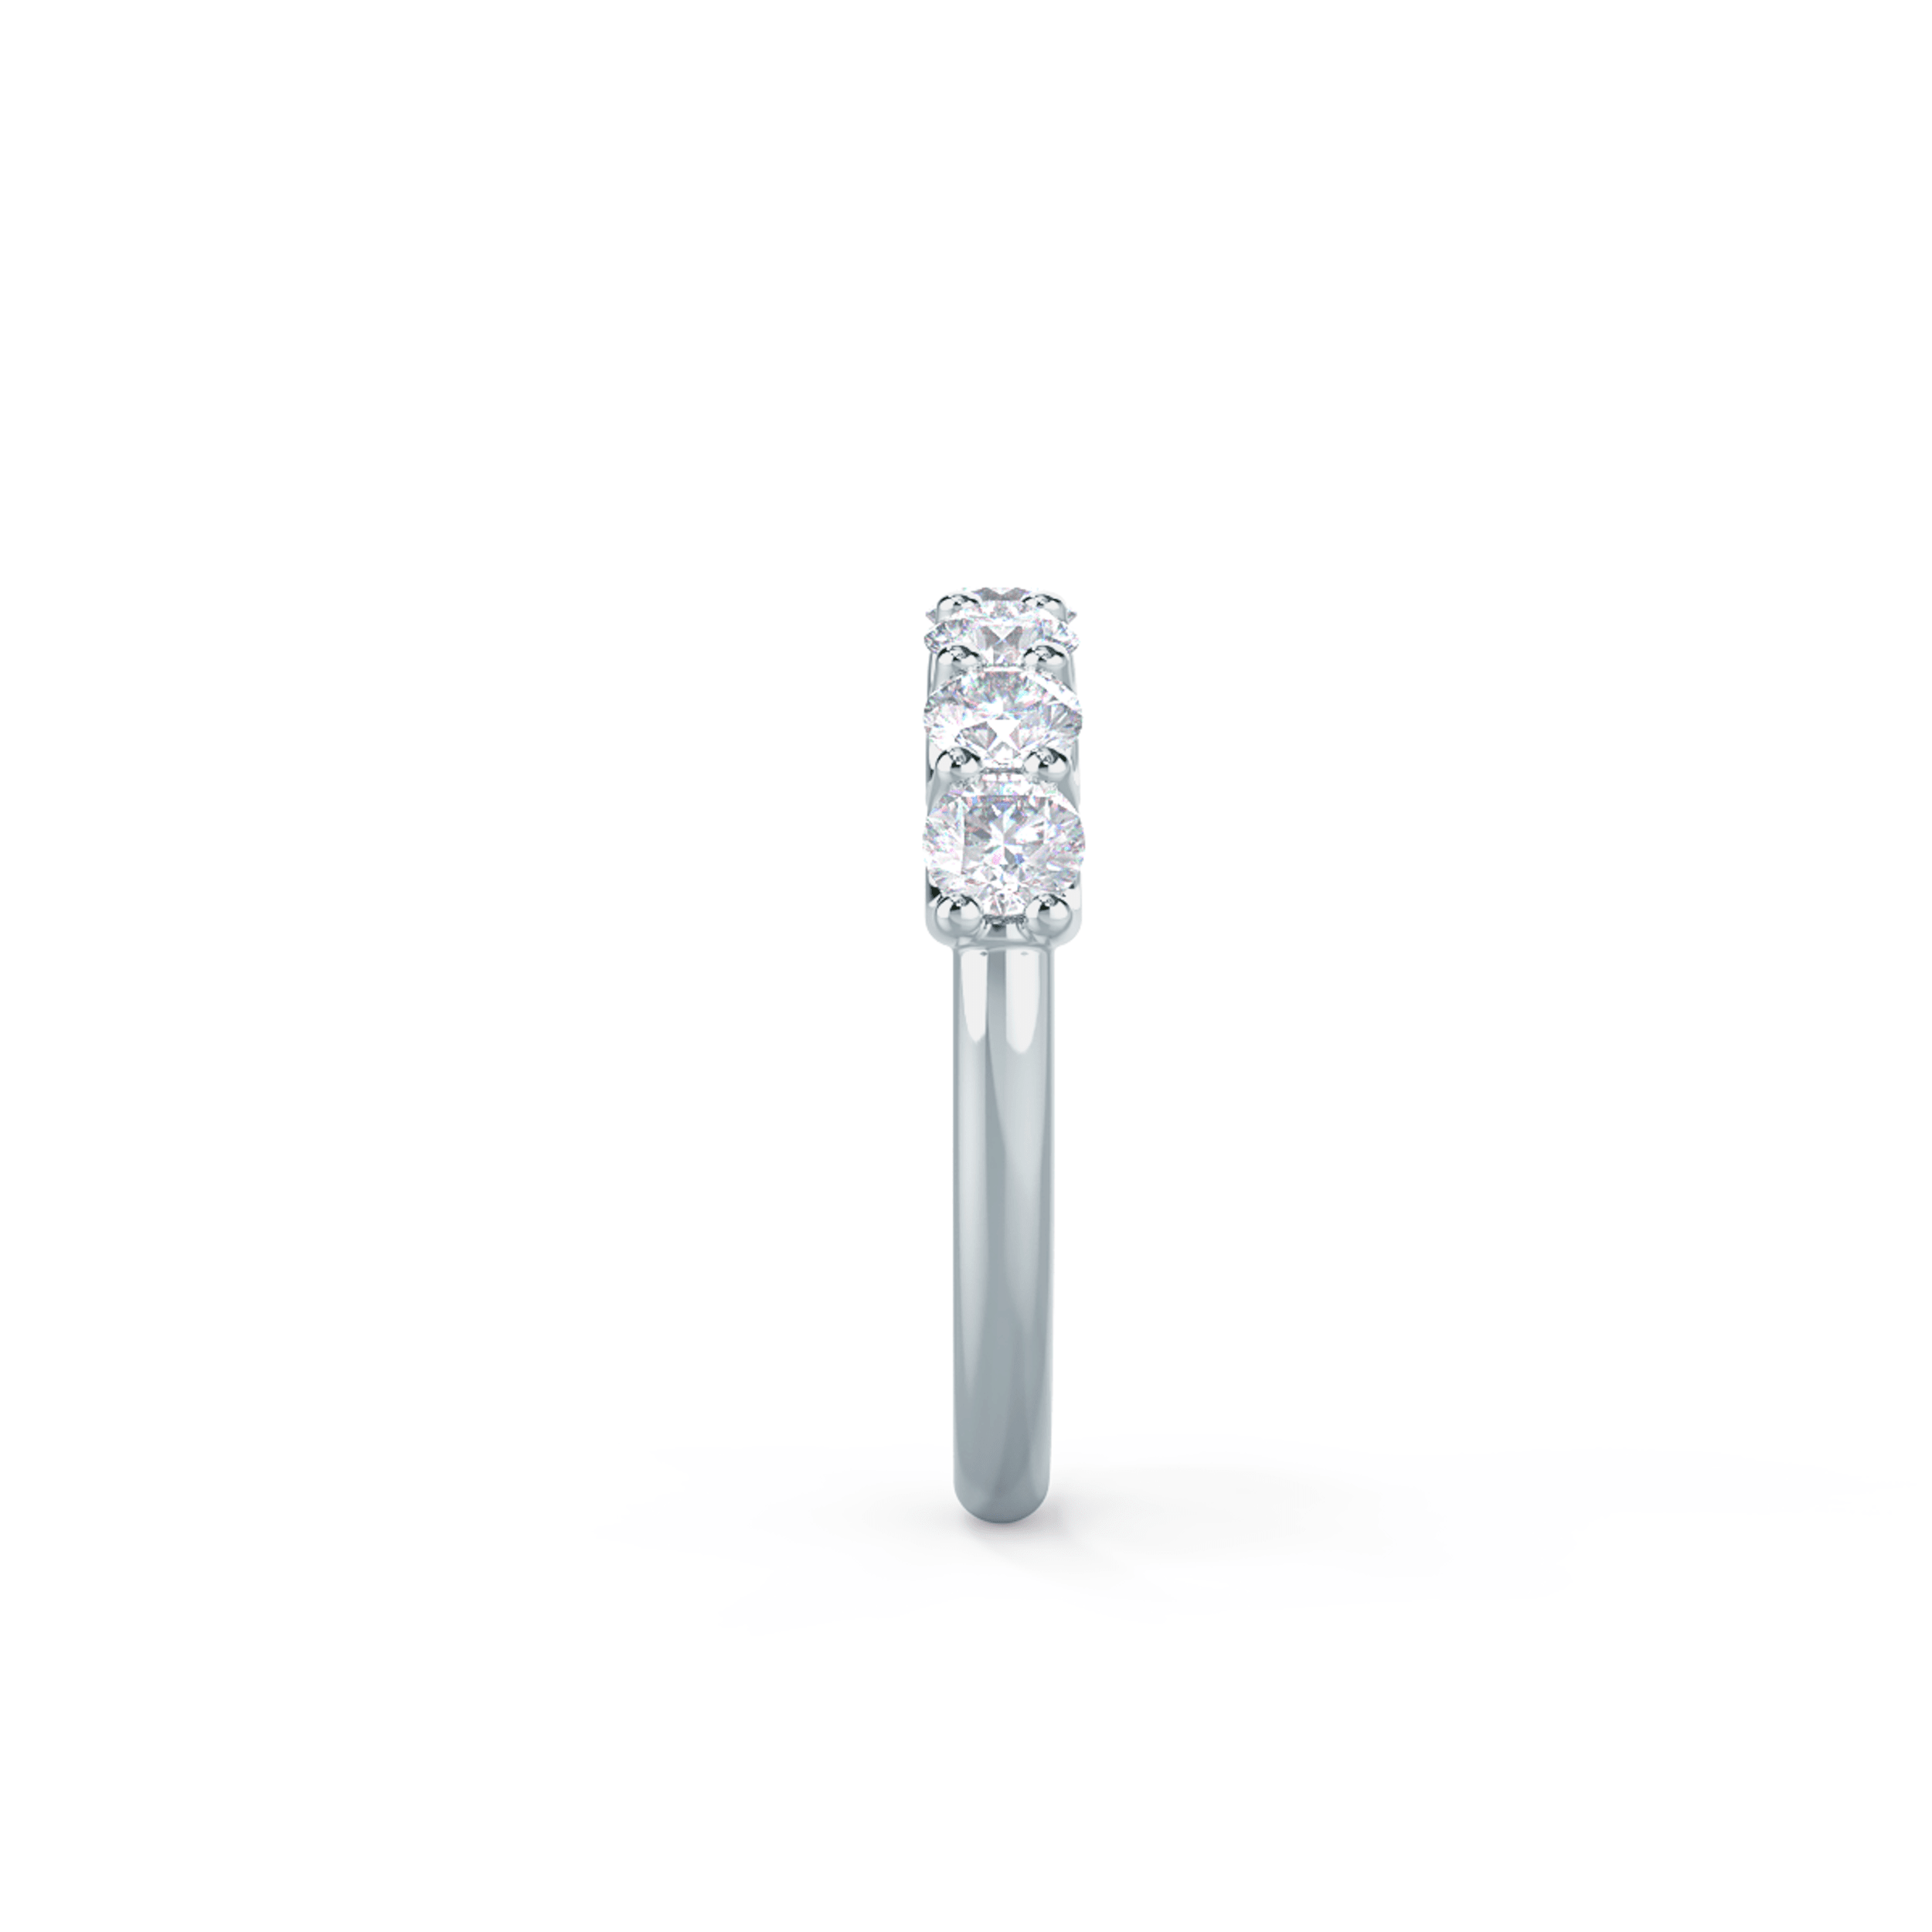 Hand Selected 1.2 ct Round Lab Diamonds set in 18k White Gold French U Seven Stone (Side View)